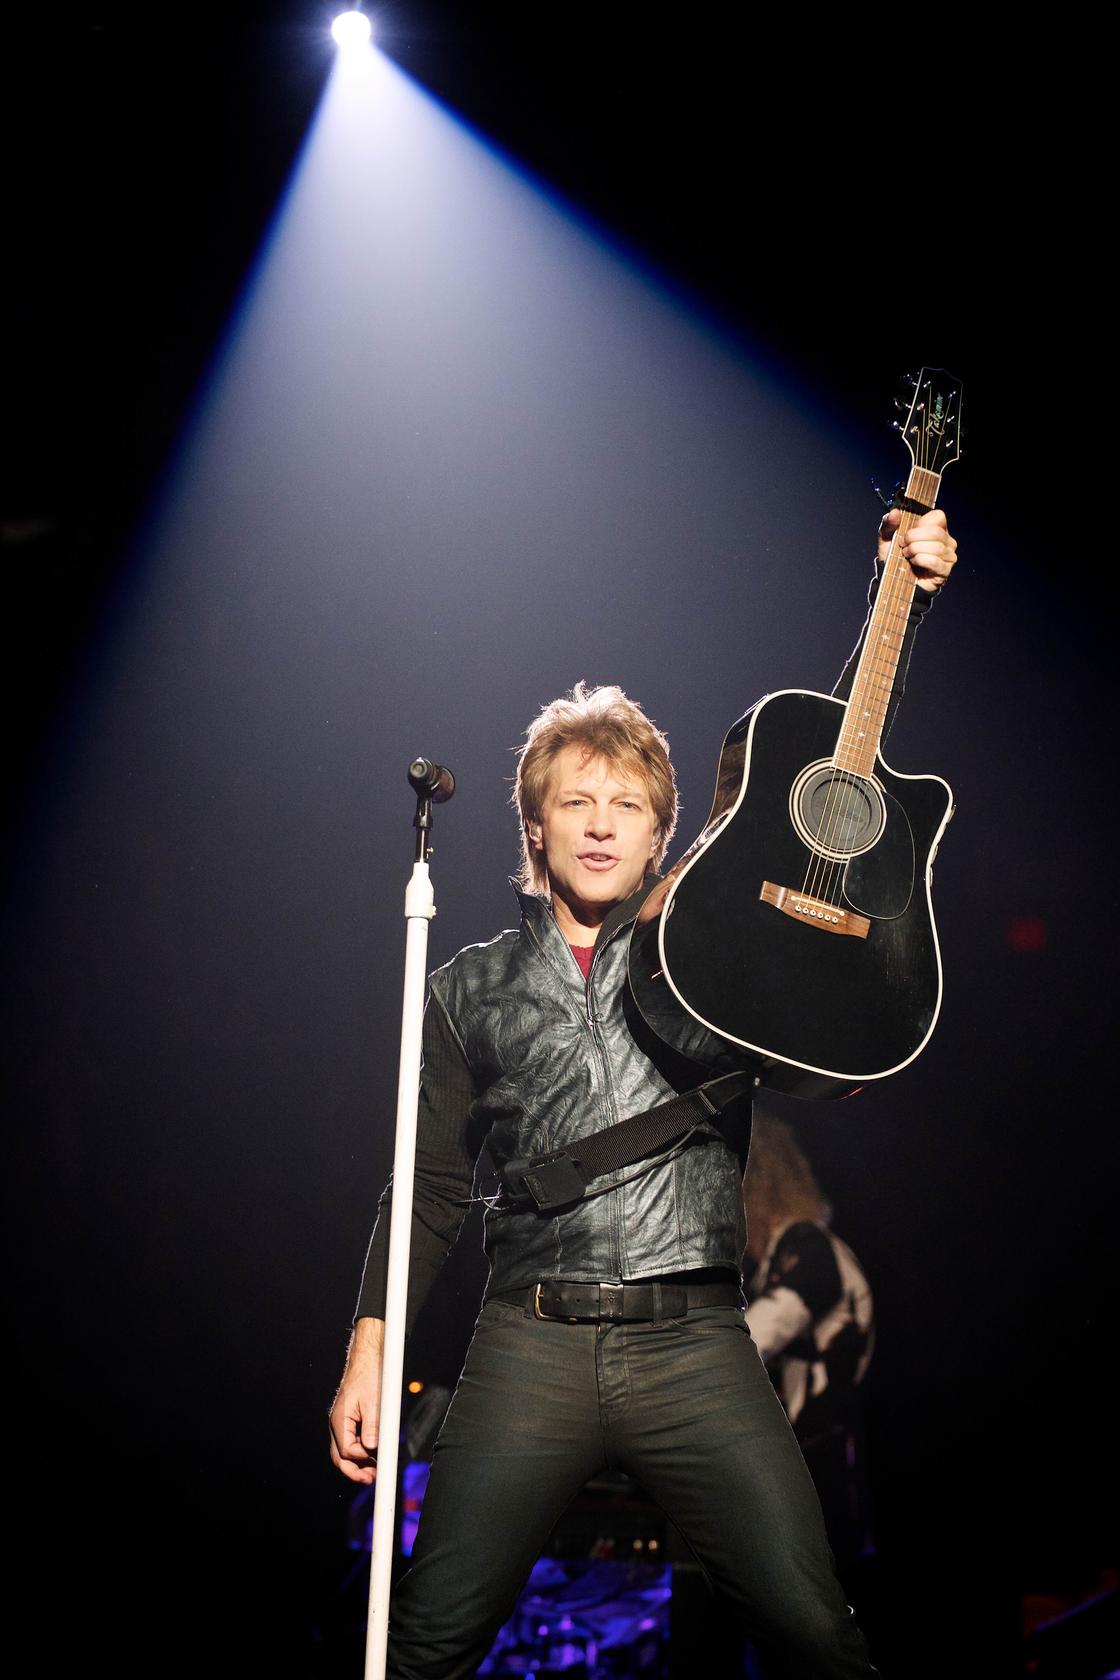 Bon Jovi, still touring after 32 years, play Macau in September.